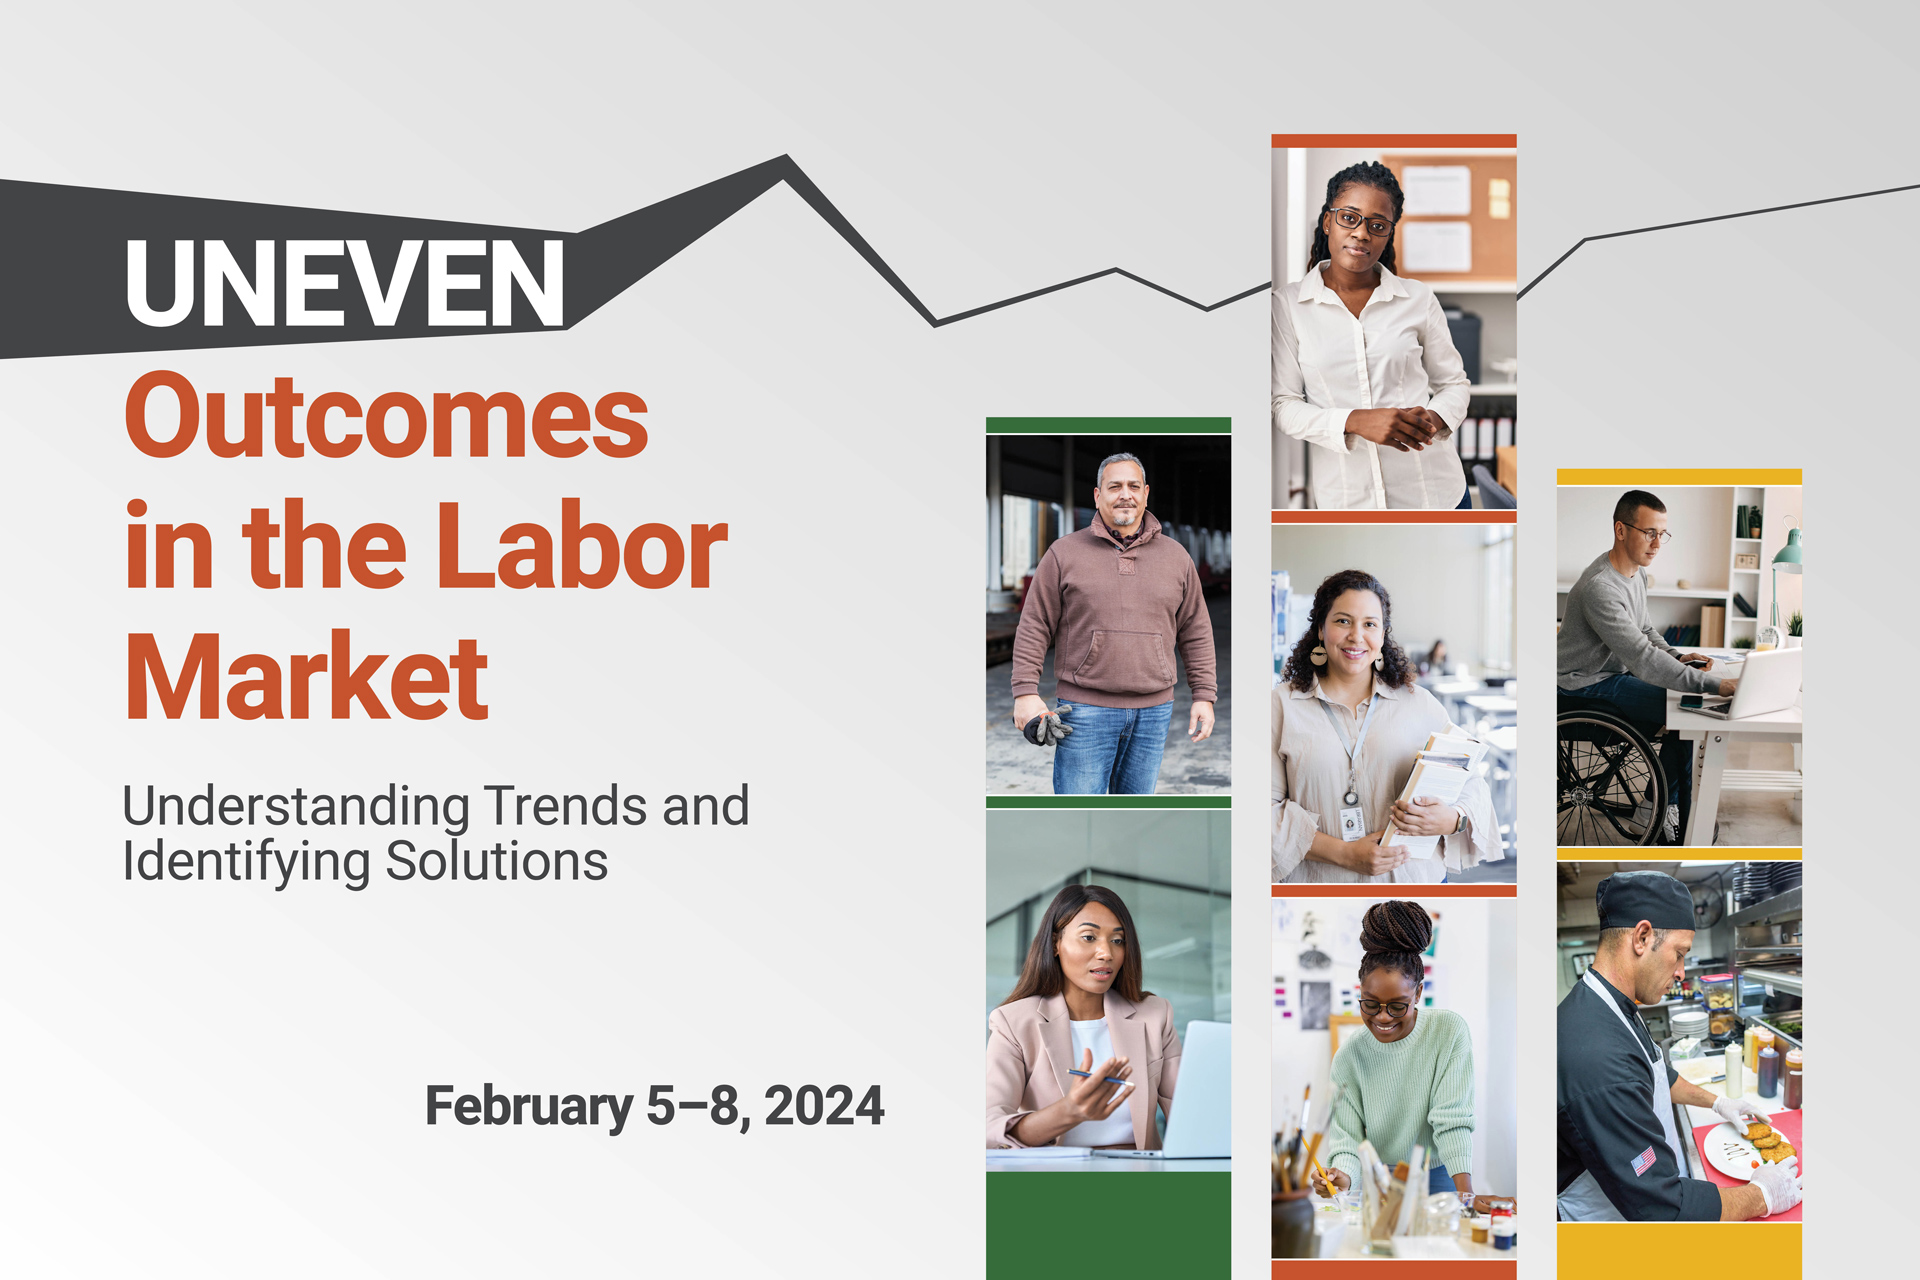 Uneven Outcomes in the Labor Market Conference 2024